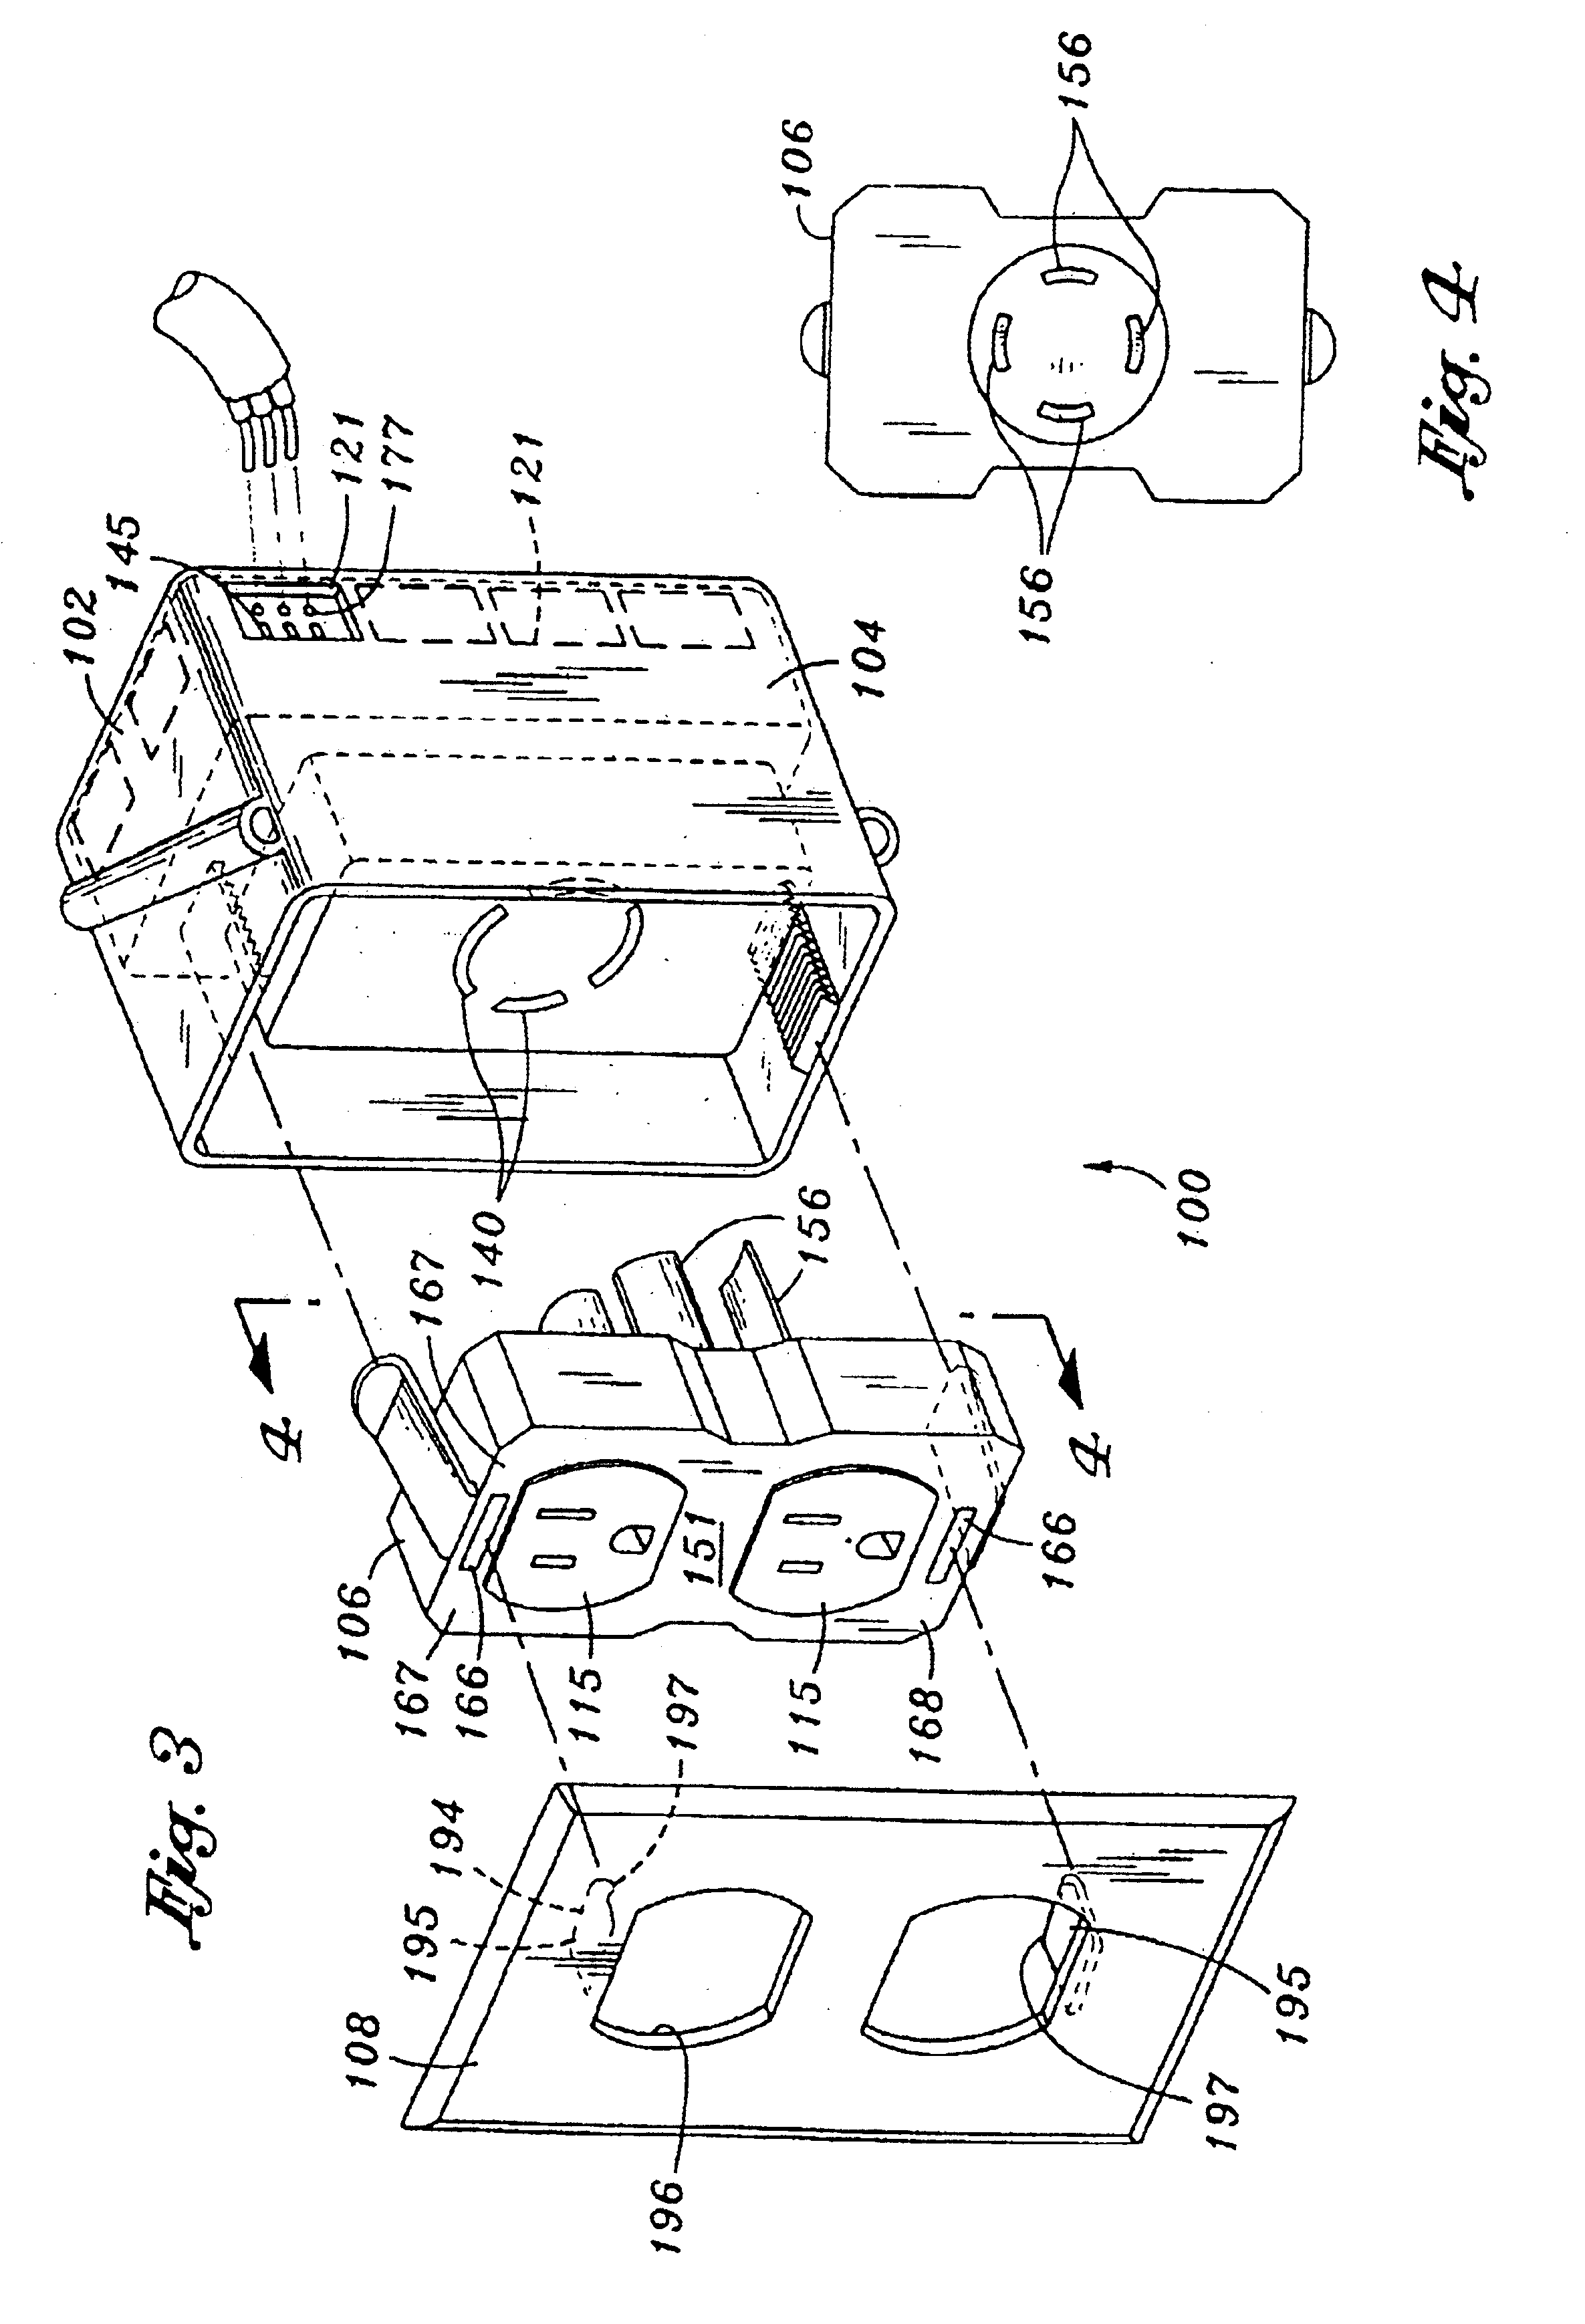 Prewired electrical apparatus having quick connect components